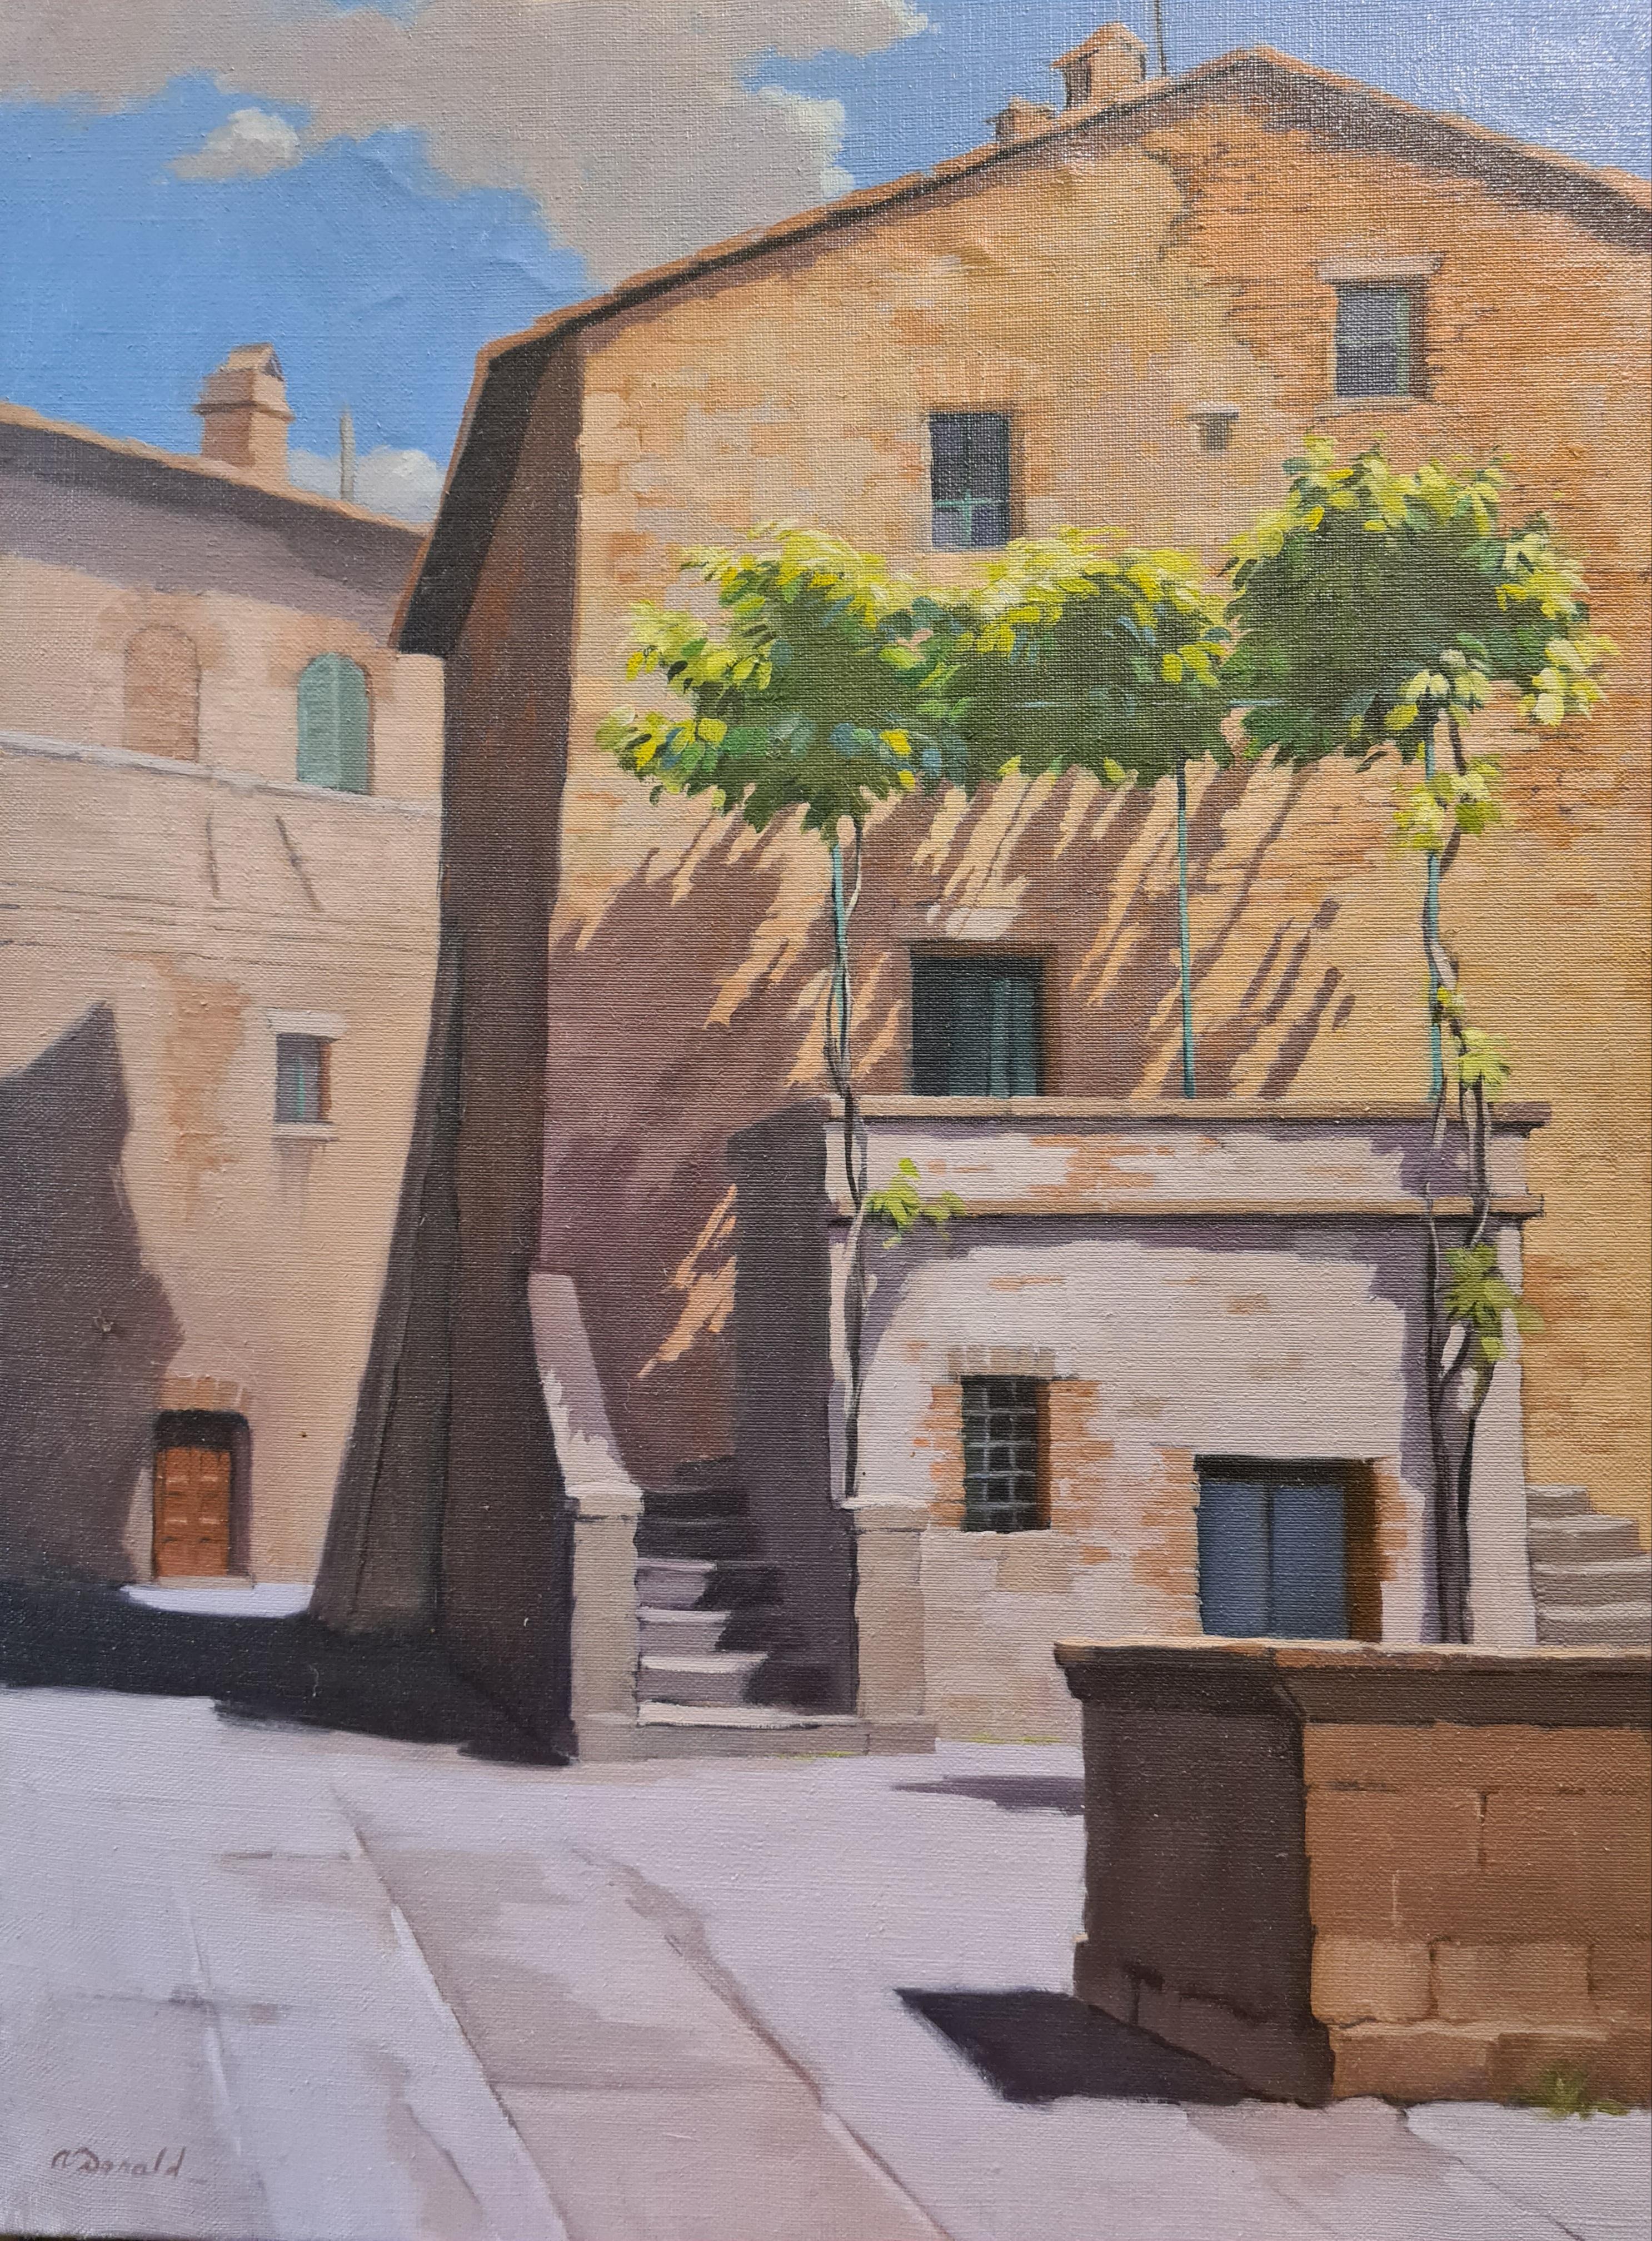 The Square, Monticchiello, Tuscany, Italy, Large Scale Oil on Canvas. - Art by Anne Donald